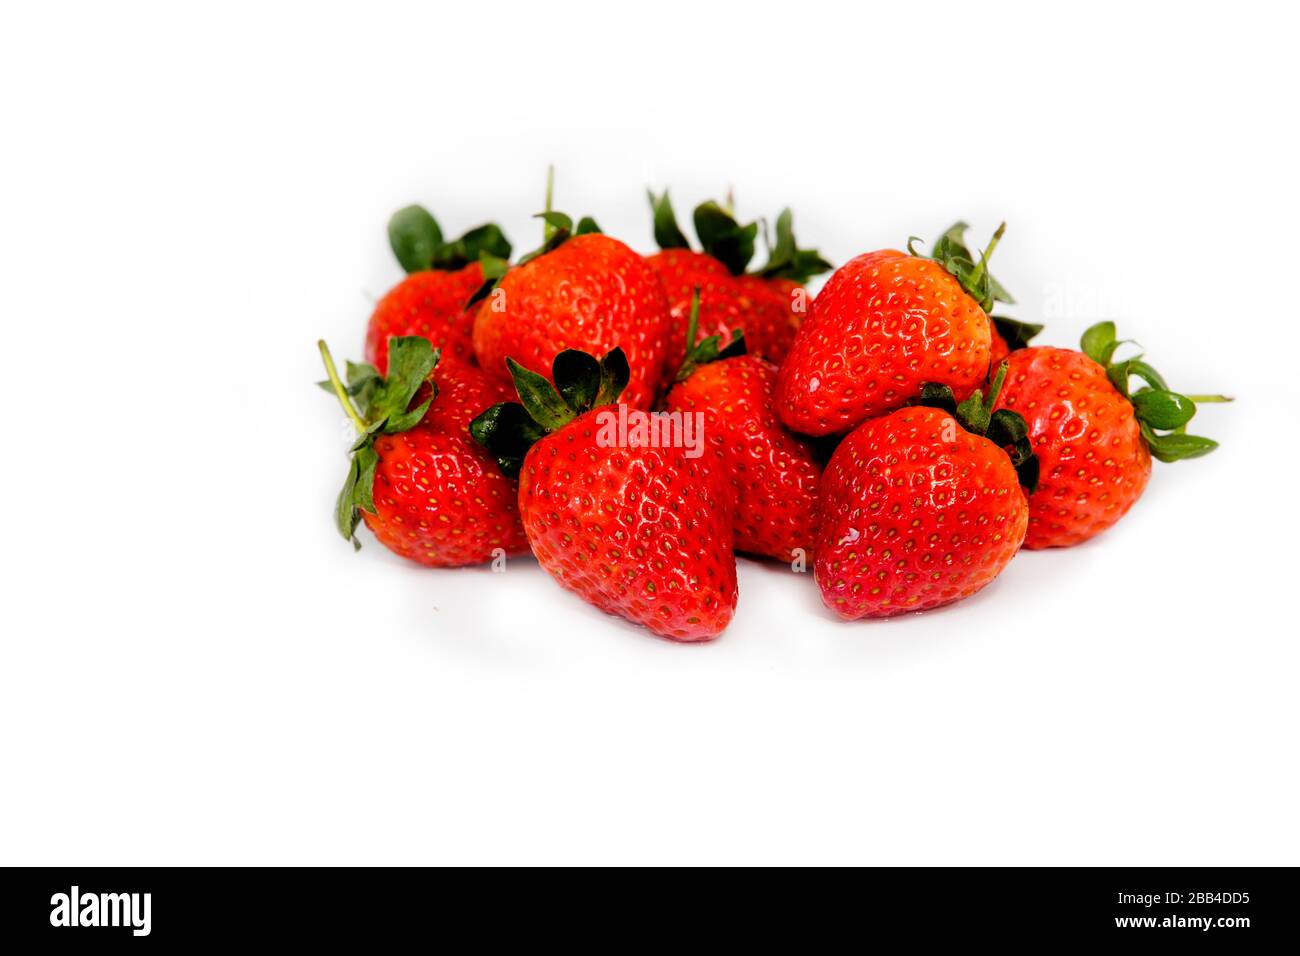 Delicious seasonal fruits, Several loose strawberries, mixed together on a white top against a white background. A perfect healthy breakfast or snack. Stock Photo